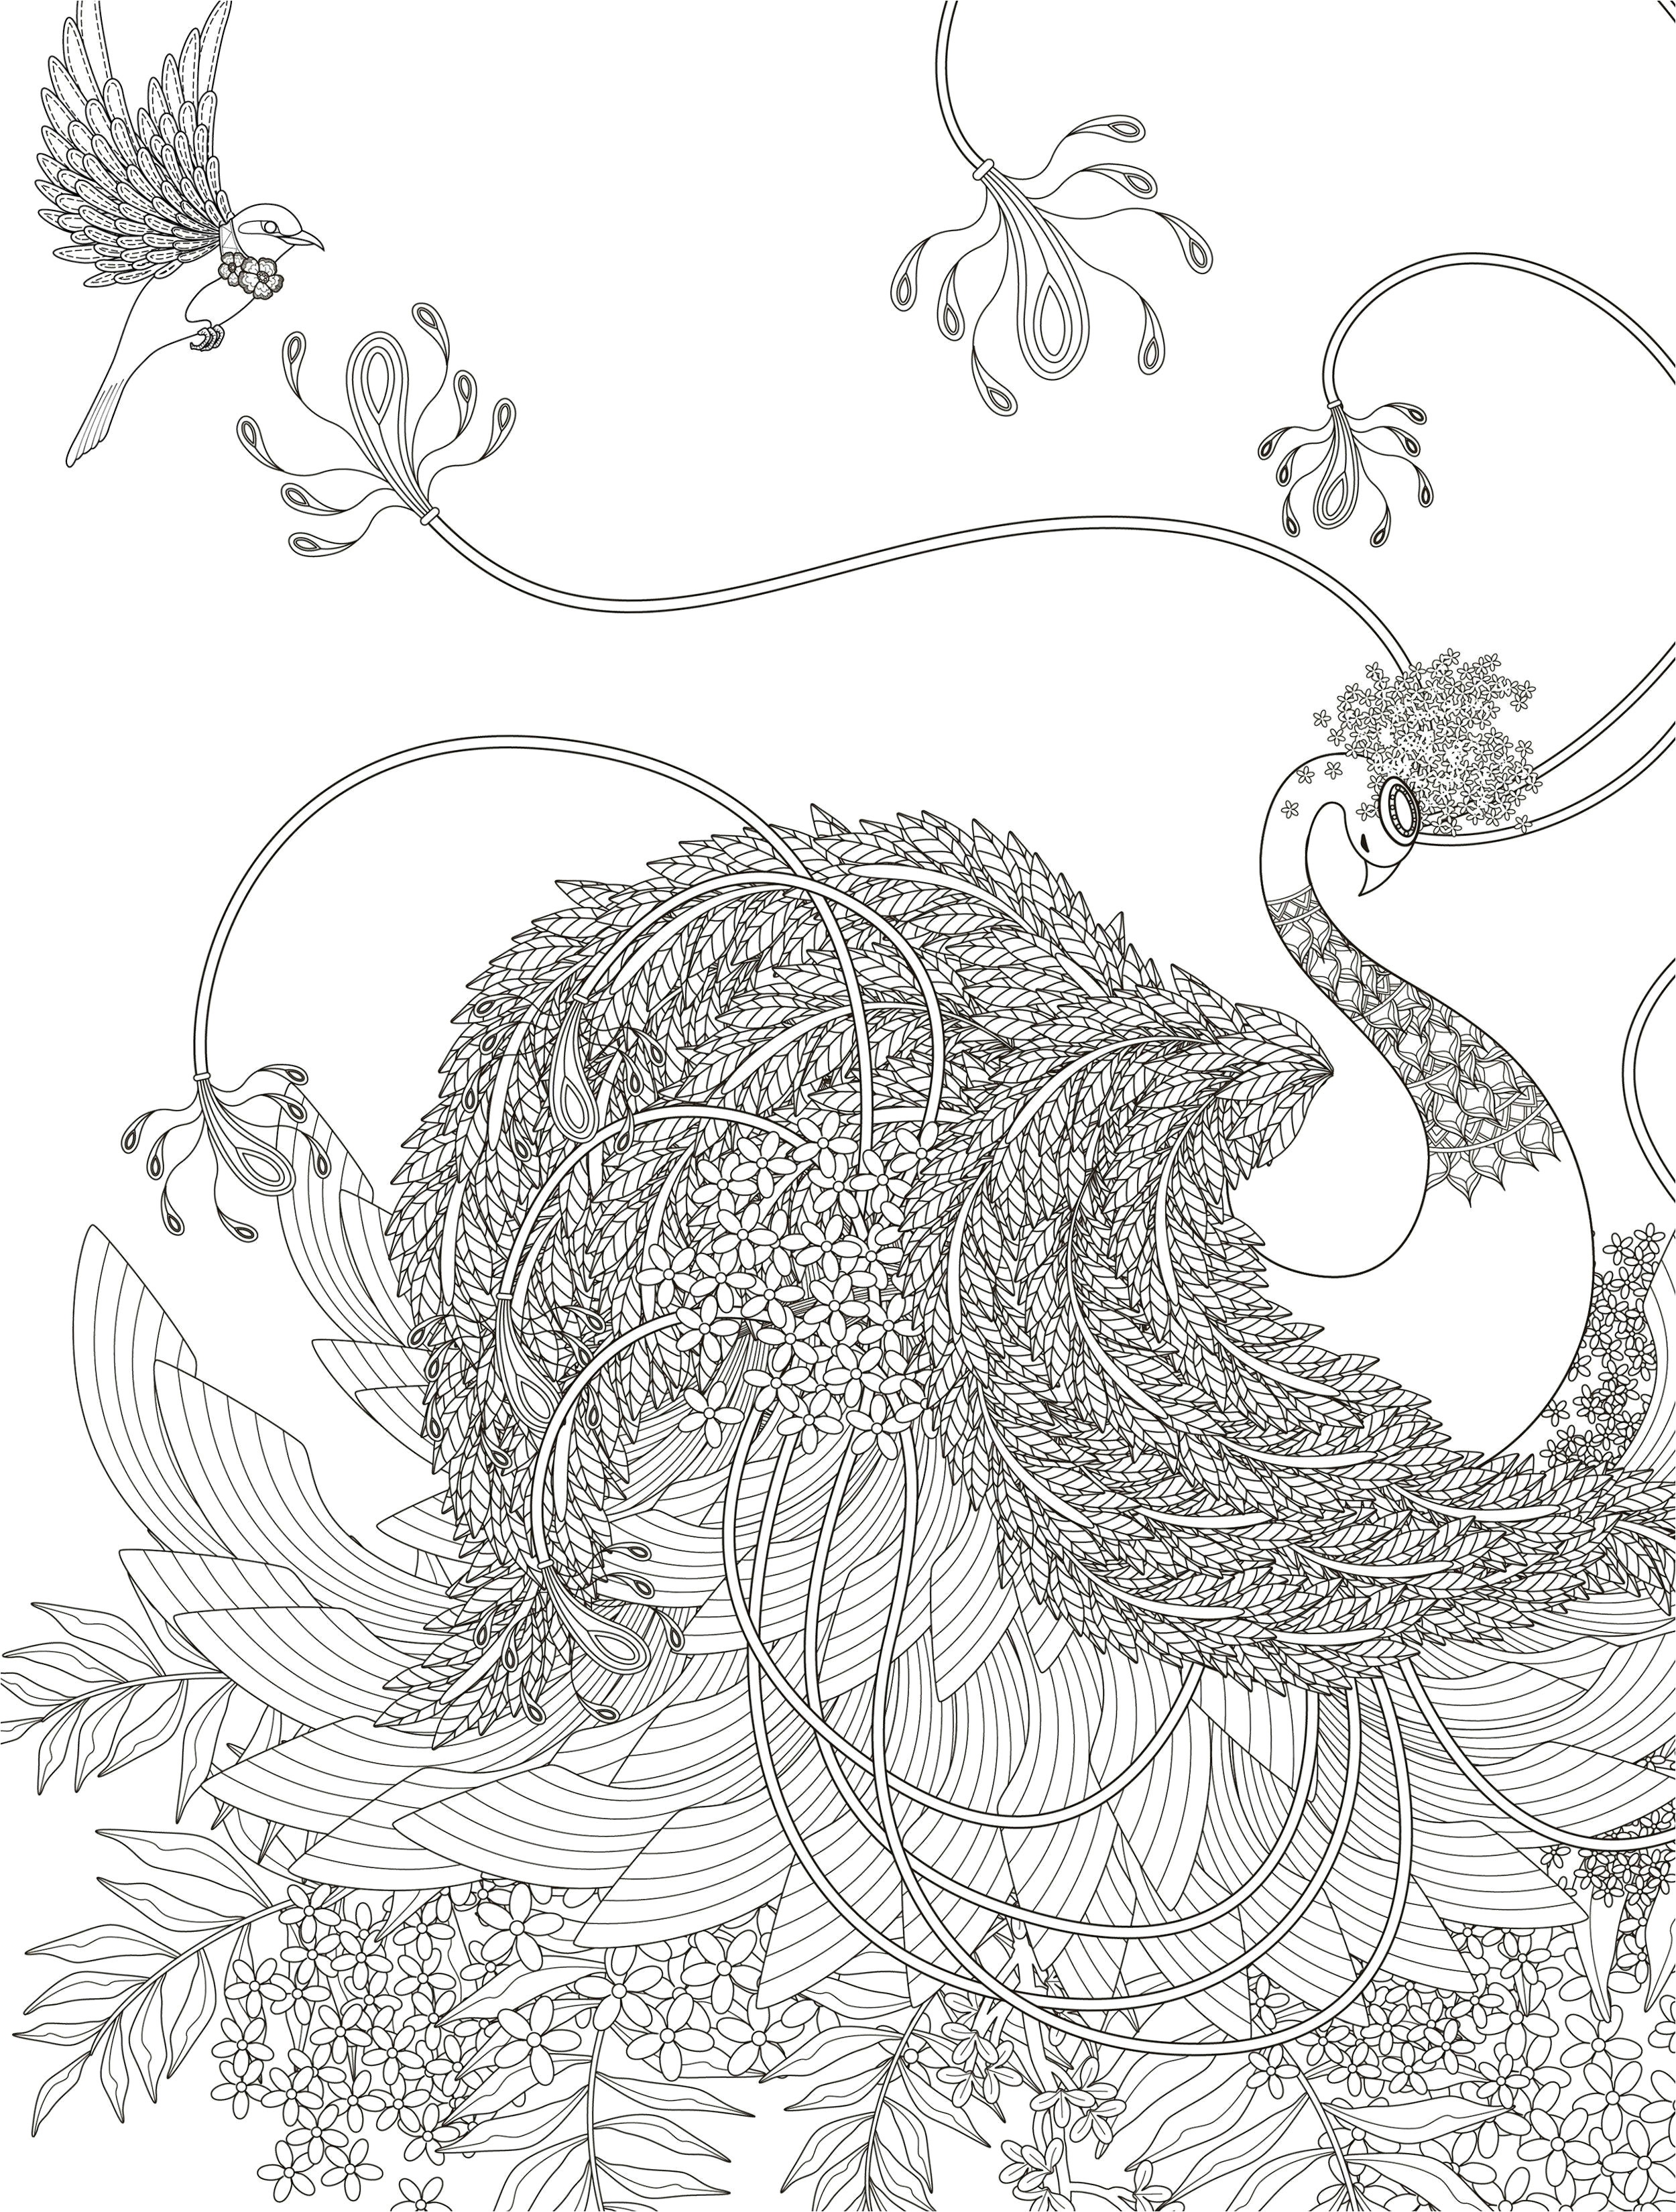 Awesome Drawings Of Dragons Coloriage De Cuisine Inspire Cool Coloriage Jeux Awesome Jeux De